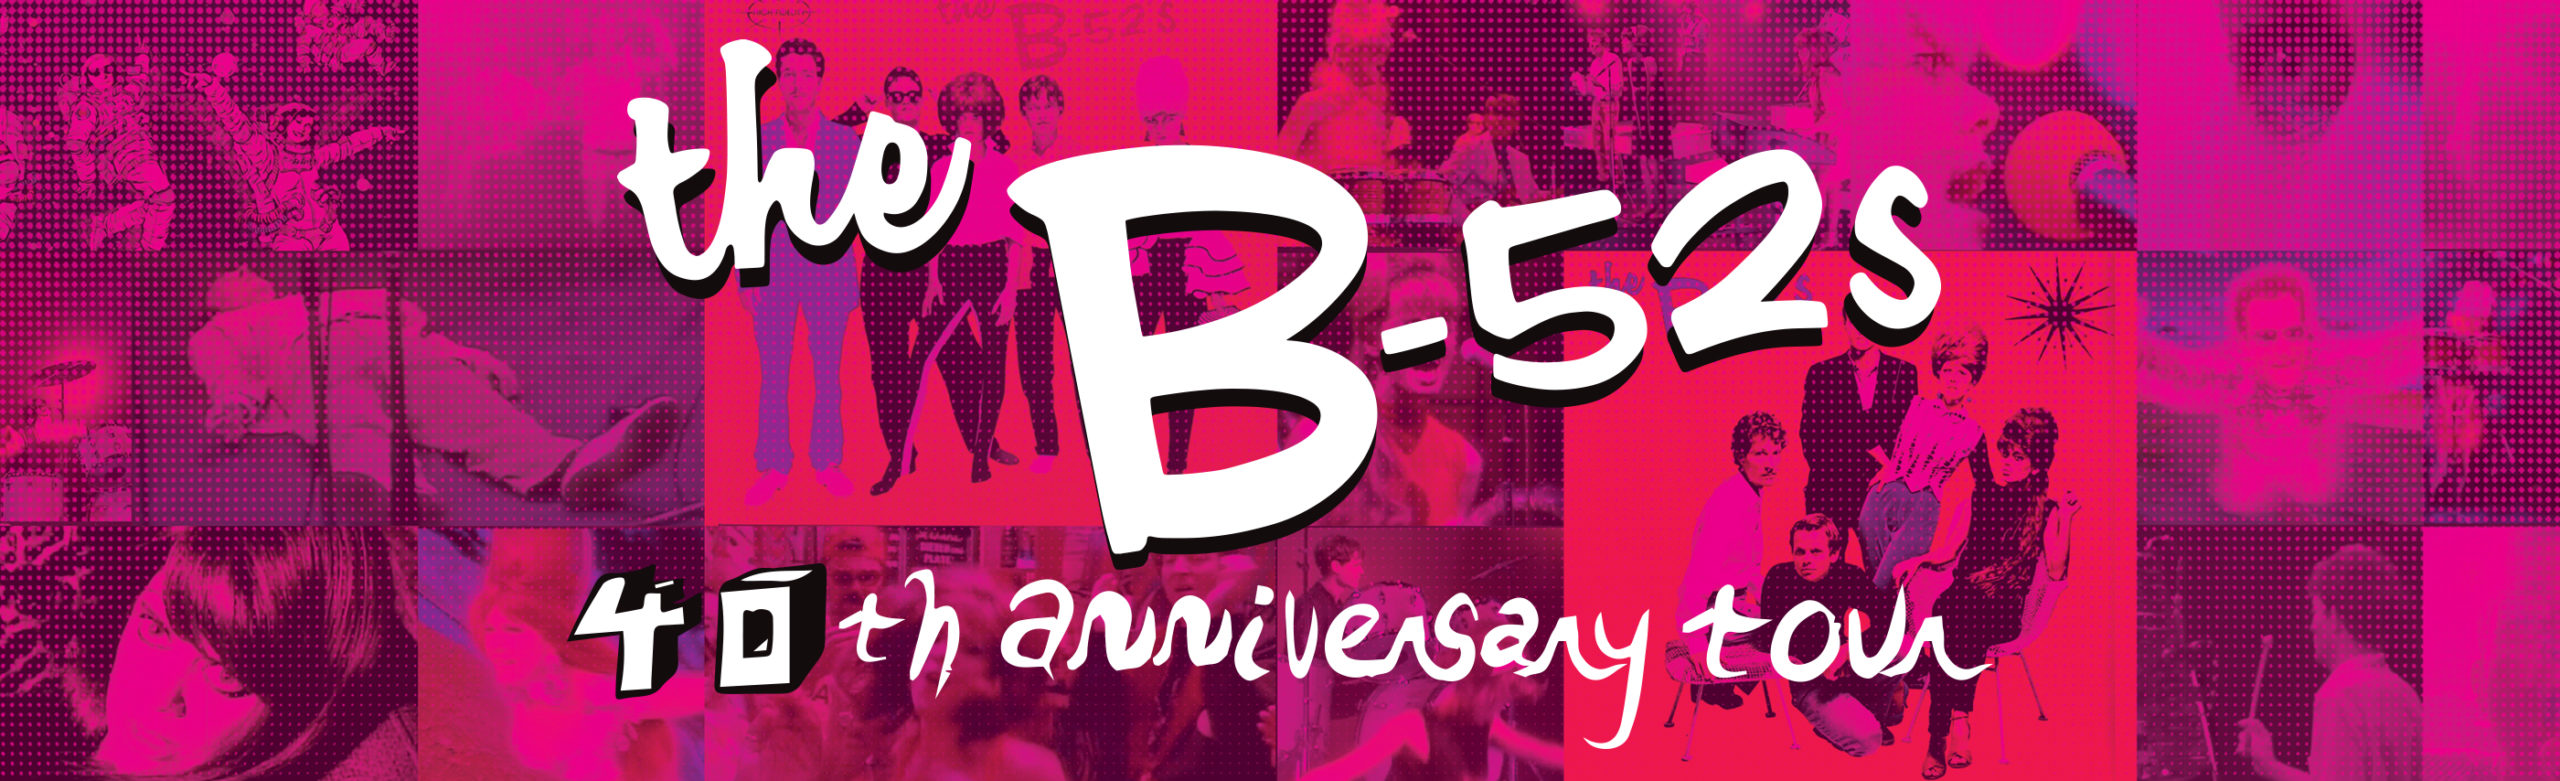 The B-52s Confirm Montana Concert on 40th Anniversary World Tour Image